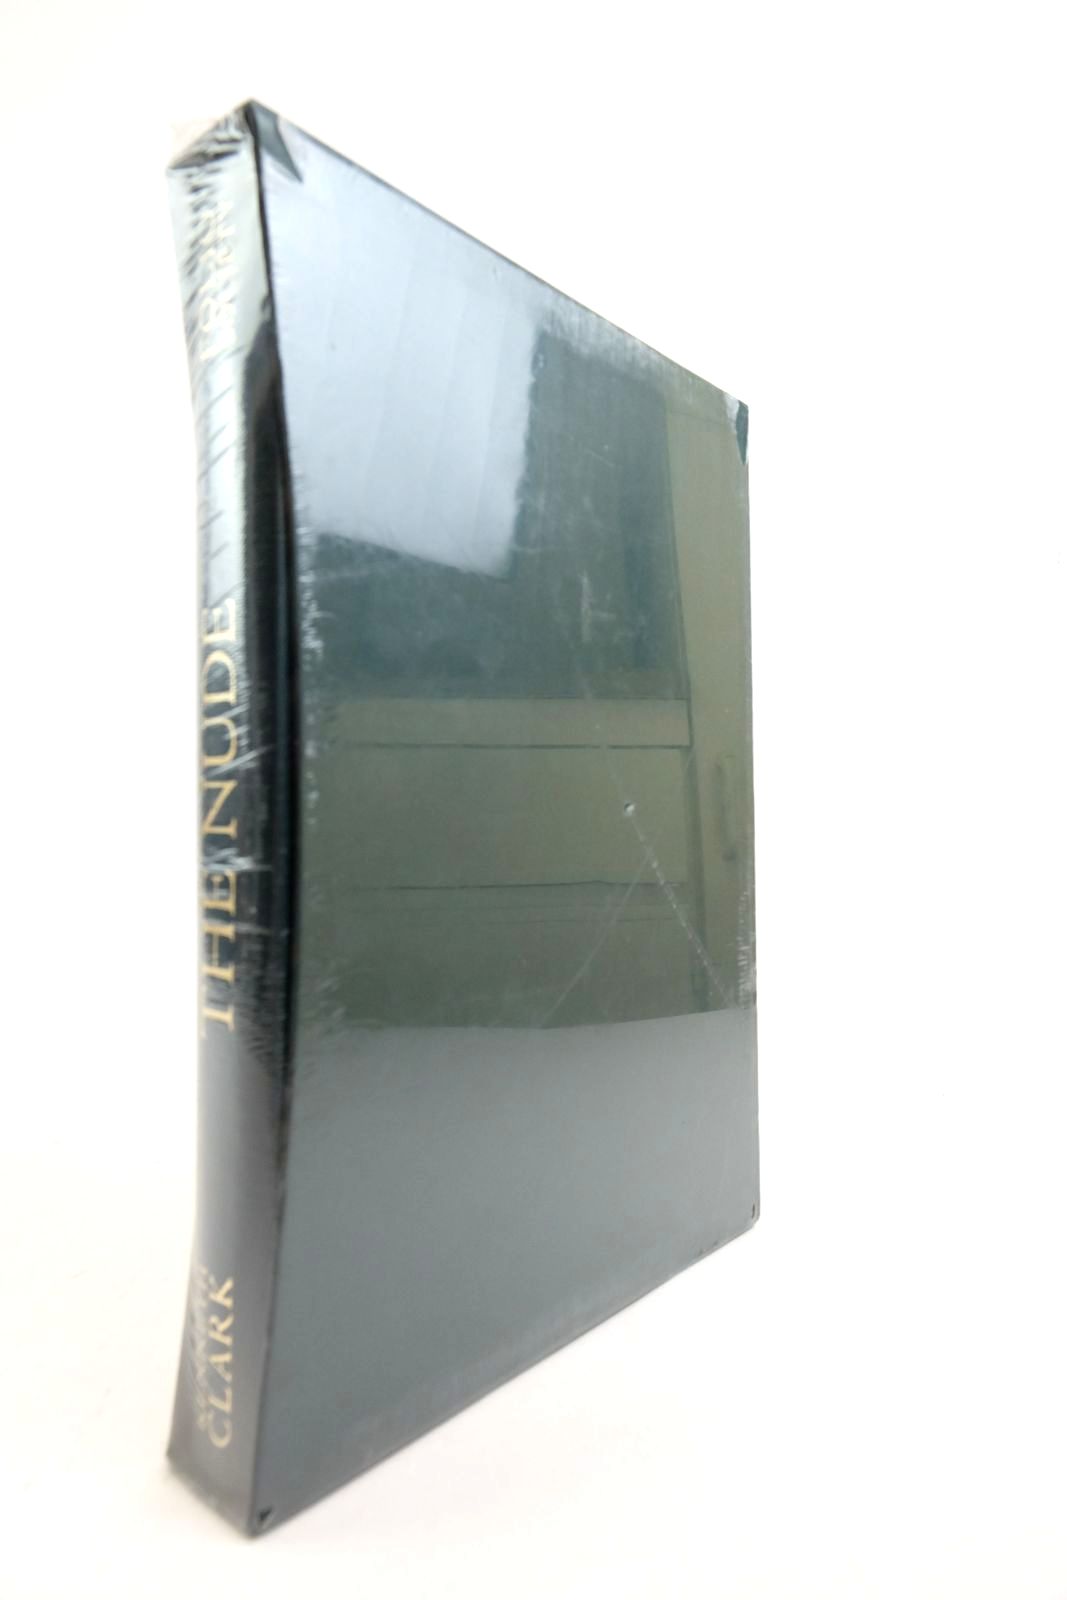 Photo of THE NUDE: A STUDY IN IDEAL FORM written by Clark, Kenneth
Smith, Charles Saumarez published by Folio Society (STOCK CODE: 2140158)  for sale by Stella & Rose's Books